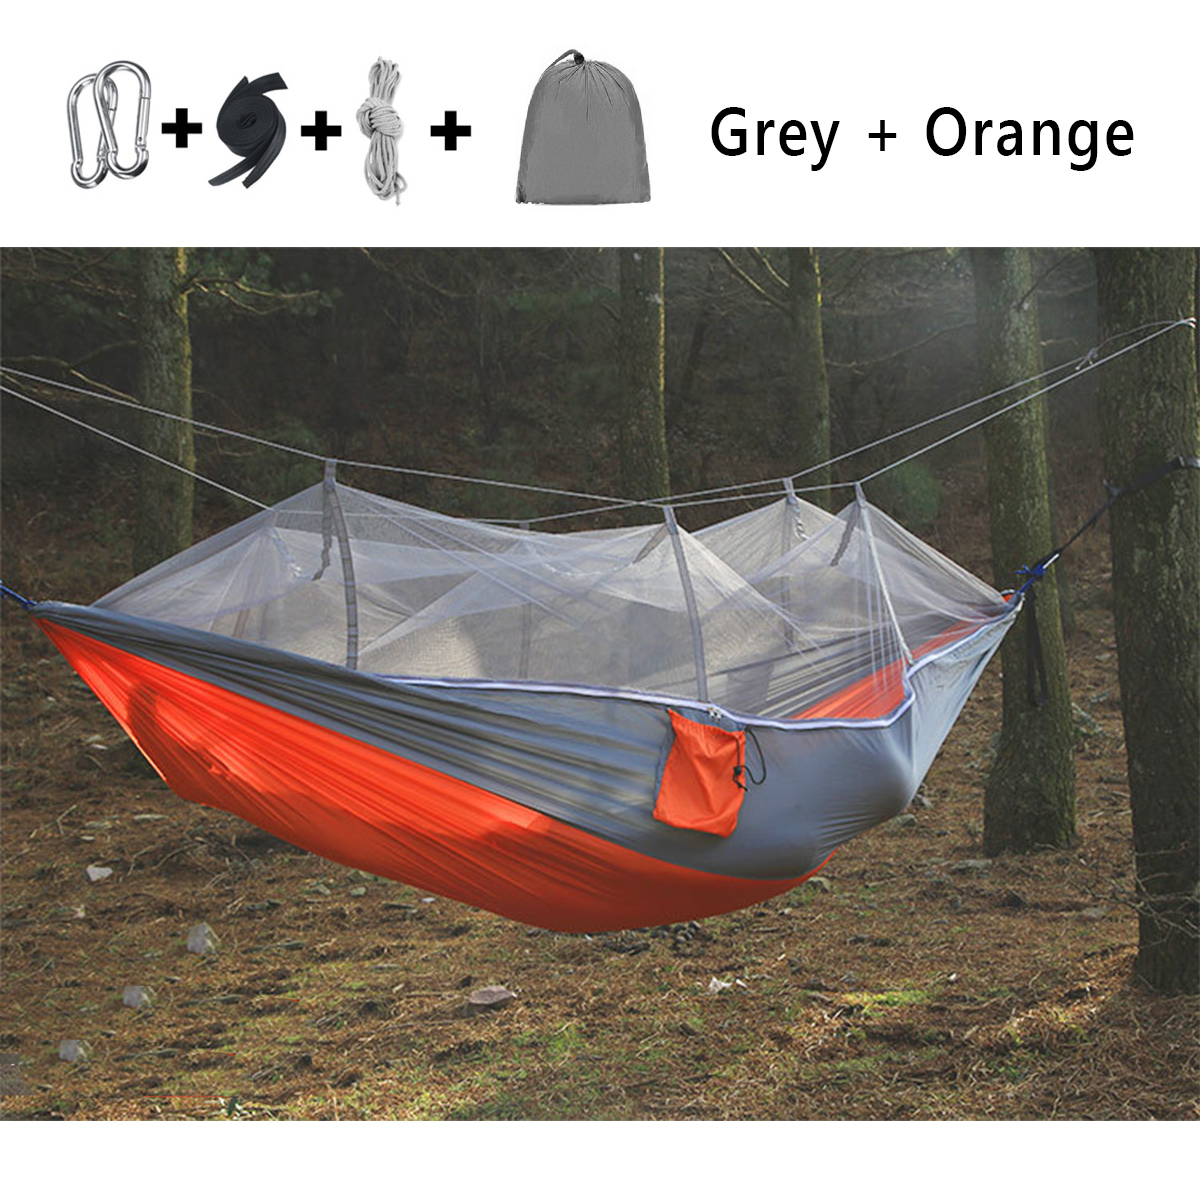 300kg-Portable-Double-Camping-Hammock-Parachute-Fabric-With-Mosquito-Net-1609645-3